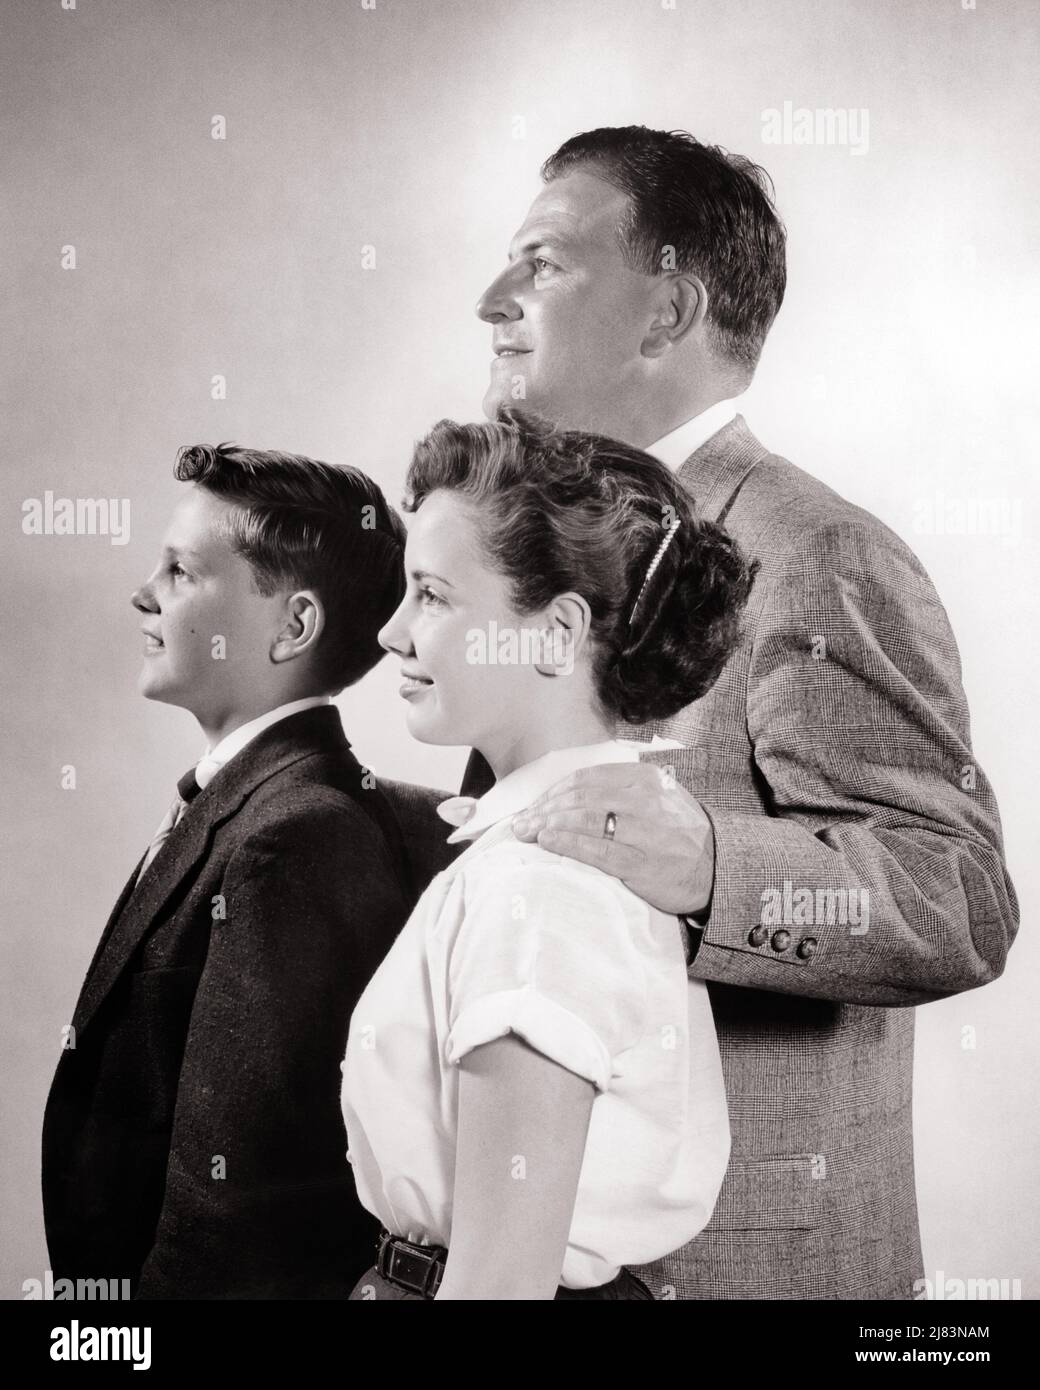 1950s PROFILE PORTRAIT OF FATHER WITH TWO TEEN CHILDREN FATHER IS STANDING BEHIND HIS SON AND DAUGHTER - j7393 HAR001 HARS NOSTALGIA BROTHER OLD FASHION SISTER 1 JUVENILE SECURITY STRONG SONS PLEASED FAMILIES JOY LIFESTYLE FEMALES BROTHERS STUDIO SHOT HOME LIFE COPY SPACE FRIENDSHIP HALF-LENGTH DAUGHTERS PERSONS INSPIRATION CARING MALES TEENAGE GIRL SIBLINGS SPIRITUALITY CONFIDENCE SISTERS FATHERS B&W HAPPINESS CHEERFUL DISCOVERY PROTECTION DADS PRIDE SIBLING SMILES CONNECTION PROFILES CONCEPTUAL JOYFUL SUPPORT TEENAGED PERSONAL ATTACHMENT AFFECTION EMOTION GROWTH JUVENILES MID-ADULT Stock Photo